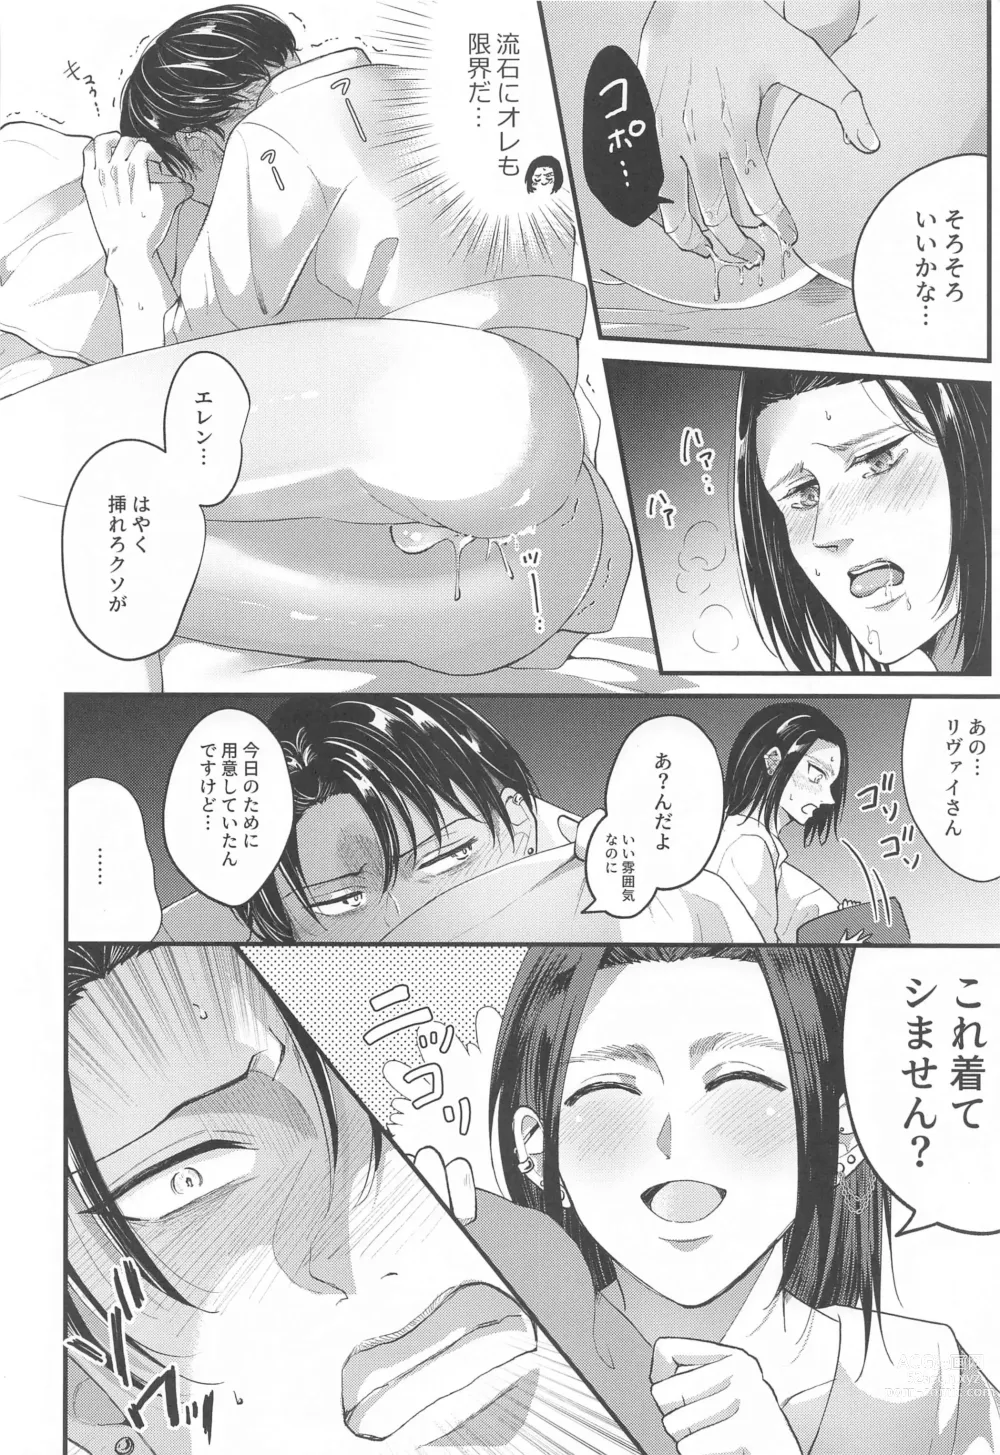 Page 25 of doujinshi Suggestive Birthday